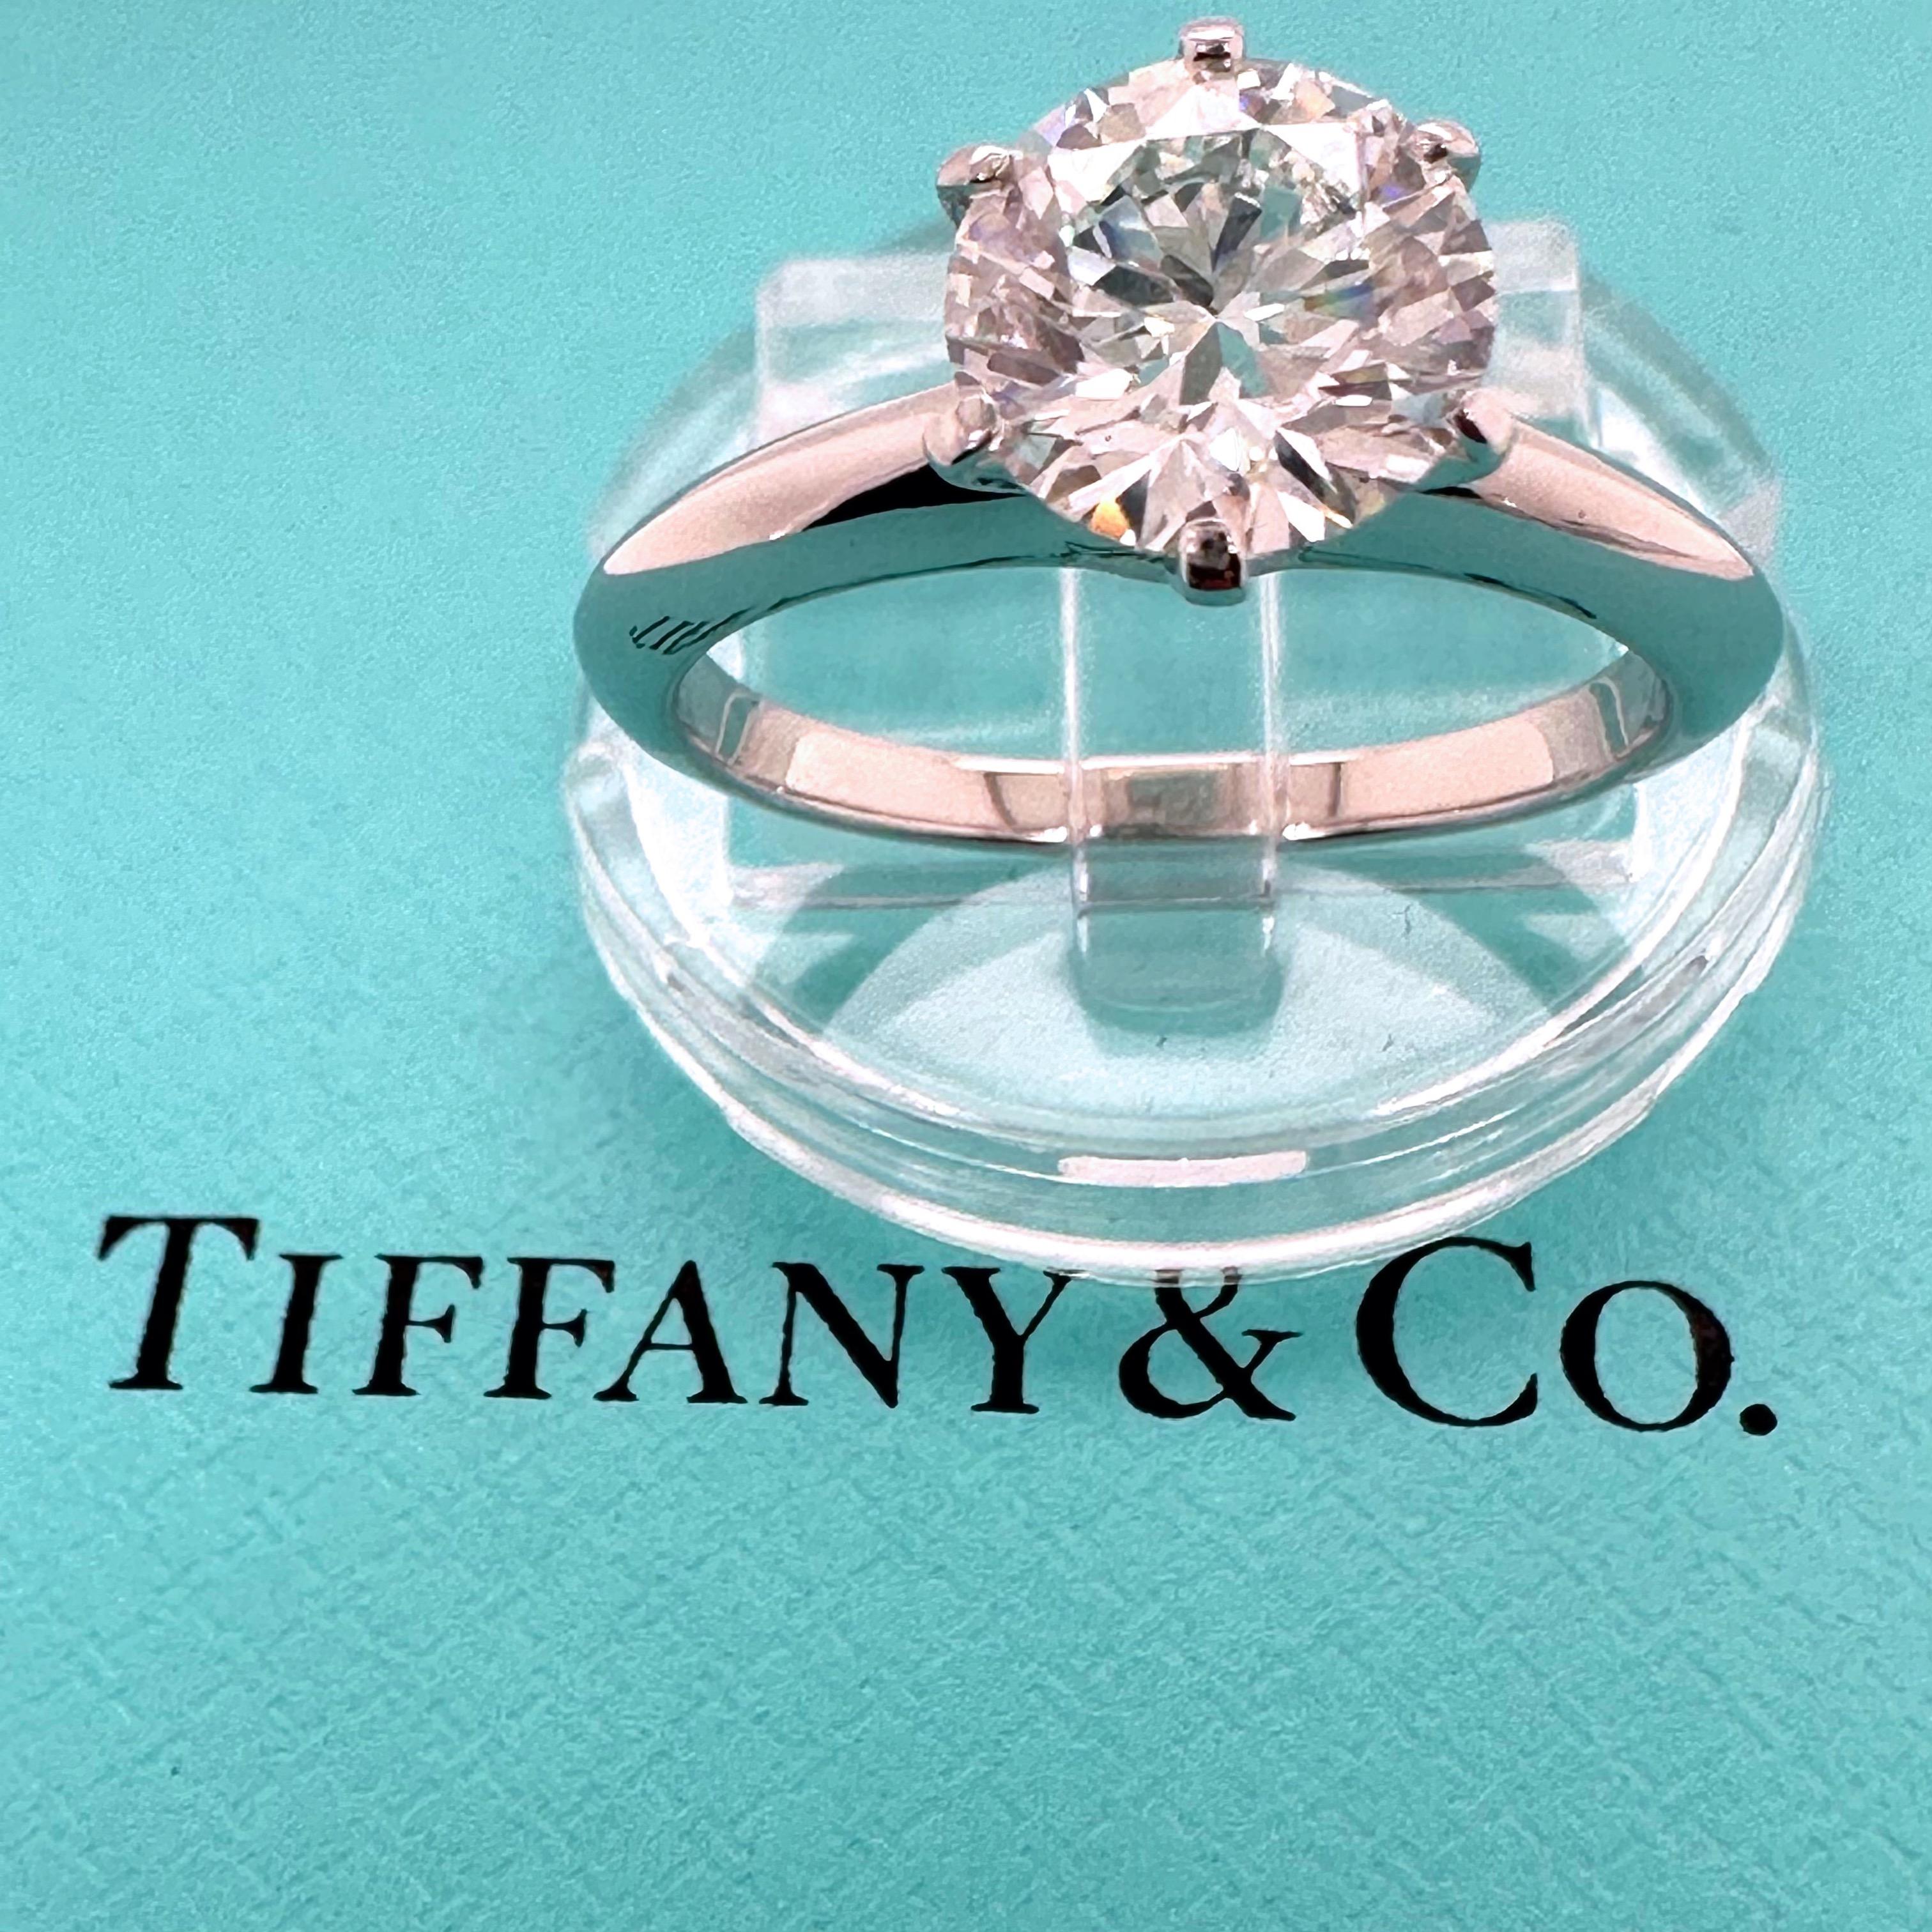 Tiffany & Co Round Diamond Solitaire 1.72 cts H VVS2 Plat Engagement Ring Papers For Sale 10